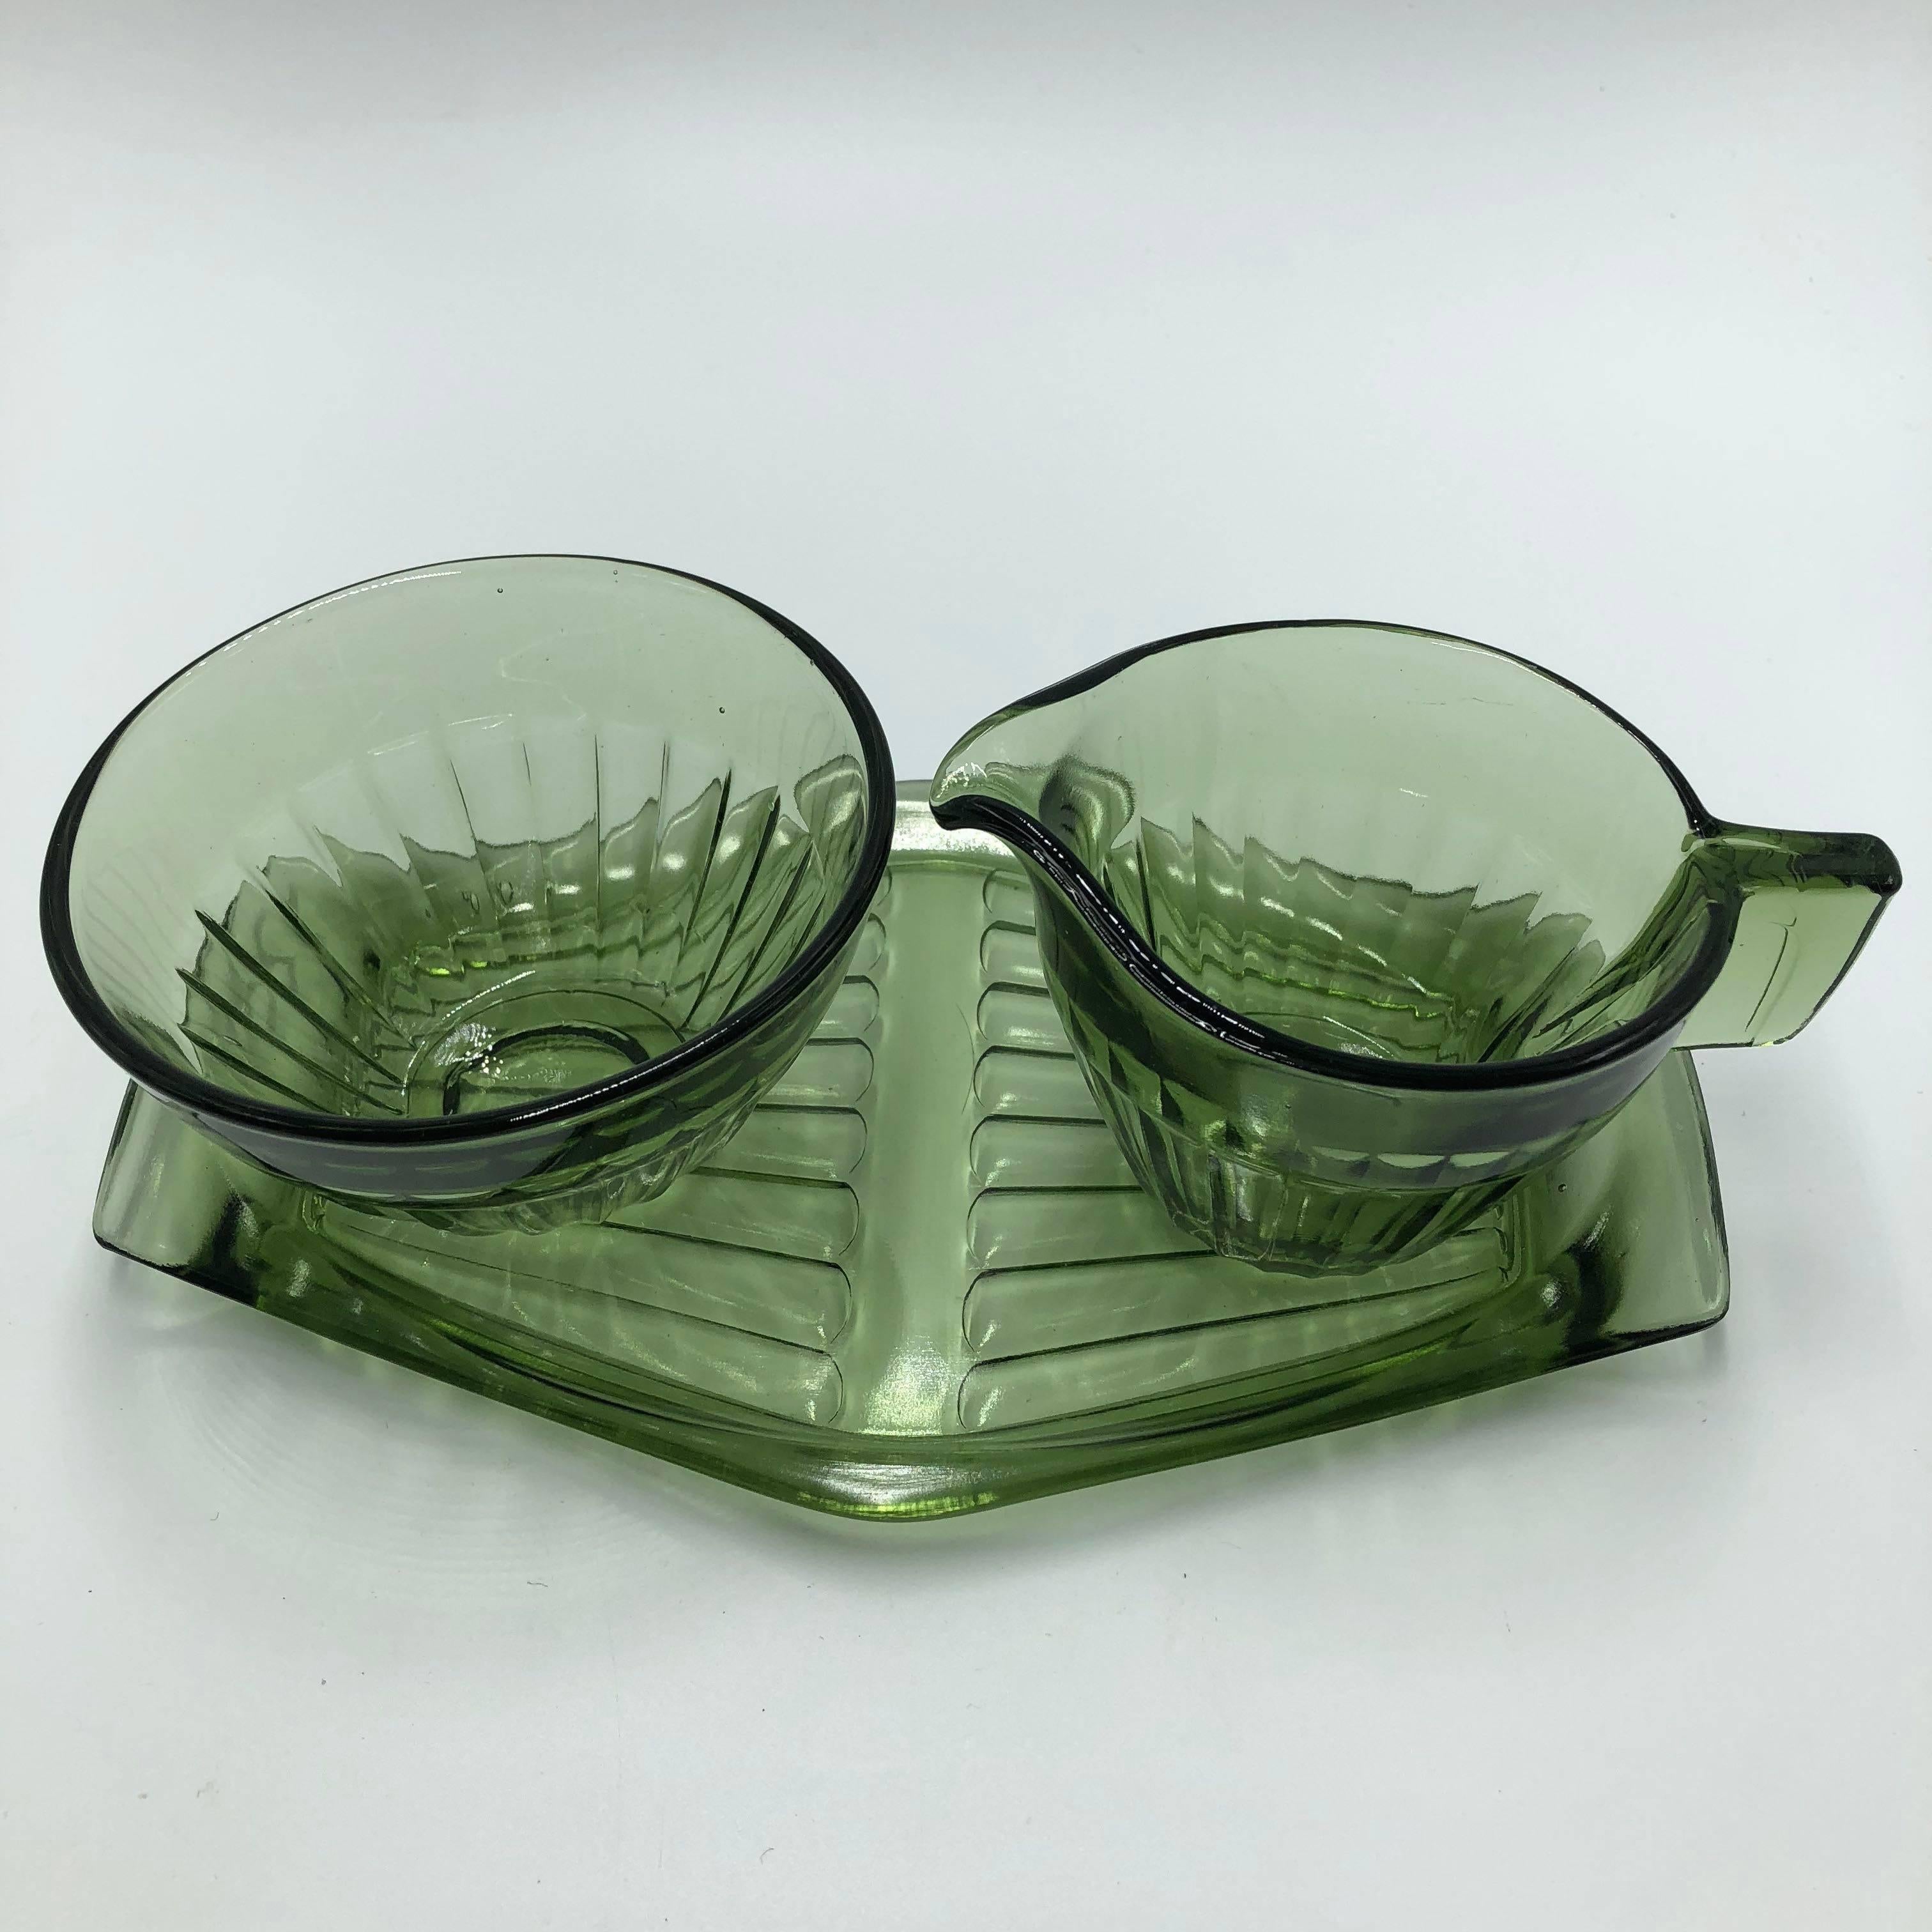 In silvergreen pressed glass milk and sugar set on a tray.
In very good condition. 
A.D. Copier is a distinguished Dutch glass designer (1901-1991).